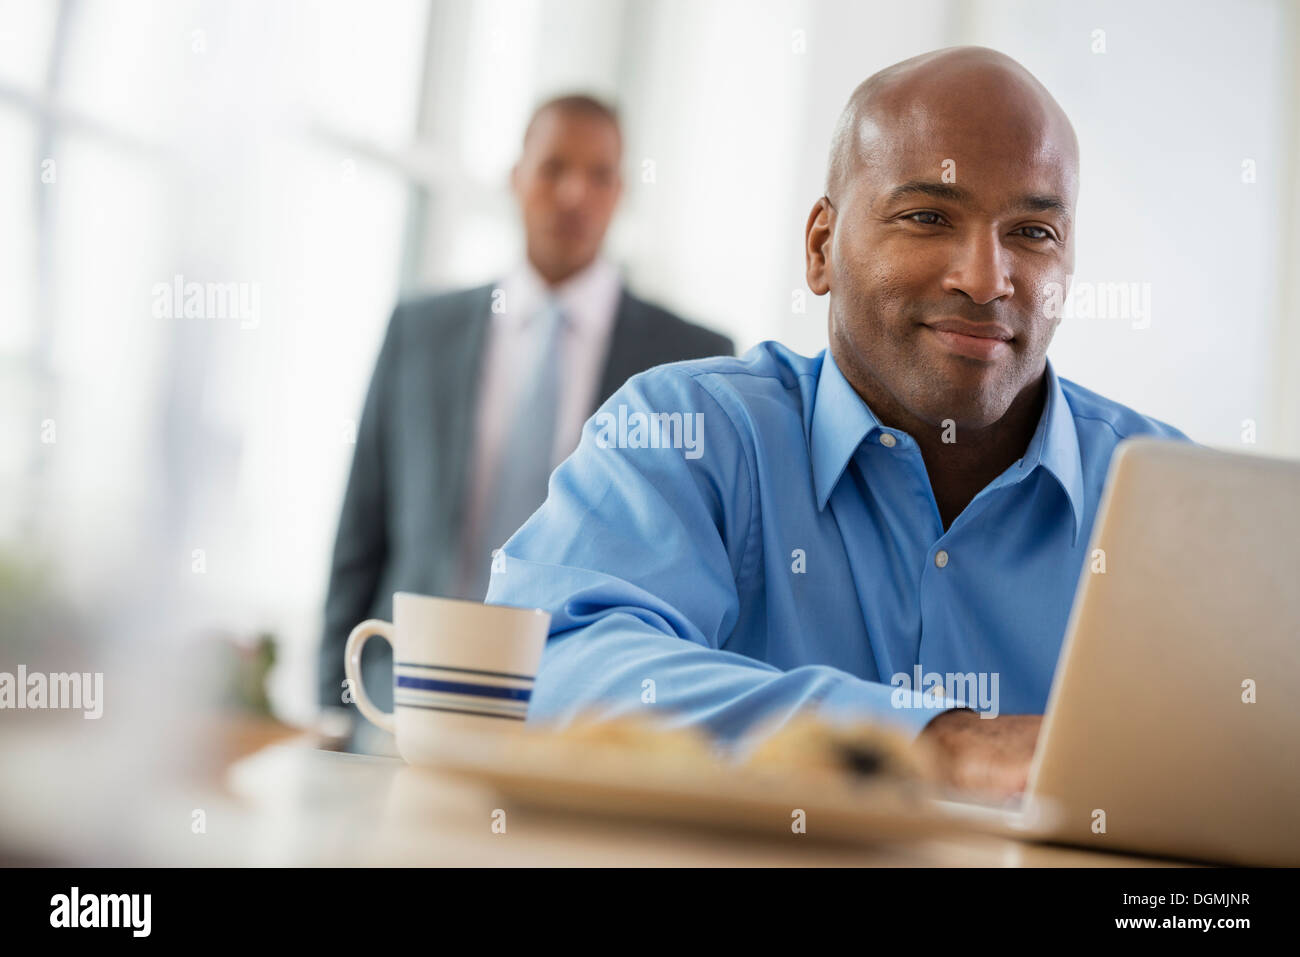 Office. A man sitting using a laptop. Stock Photo